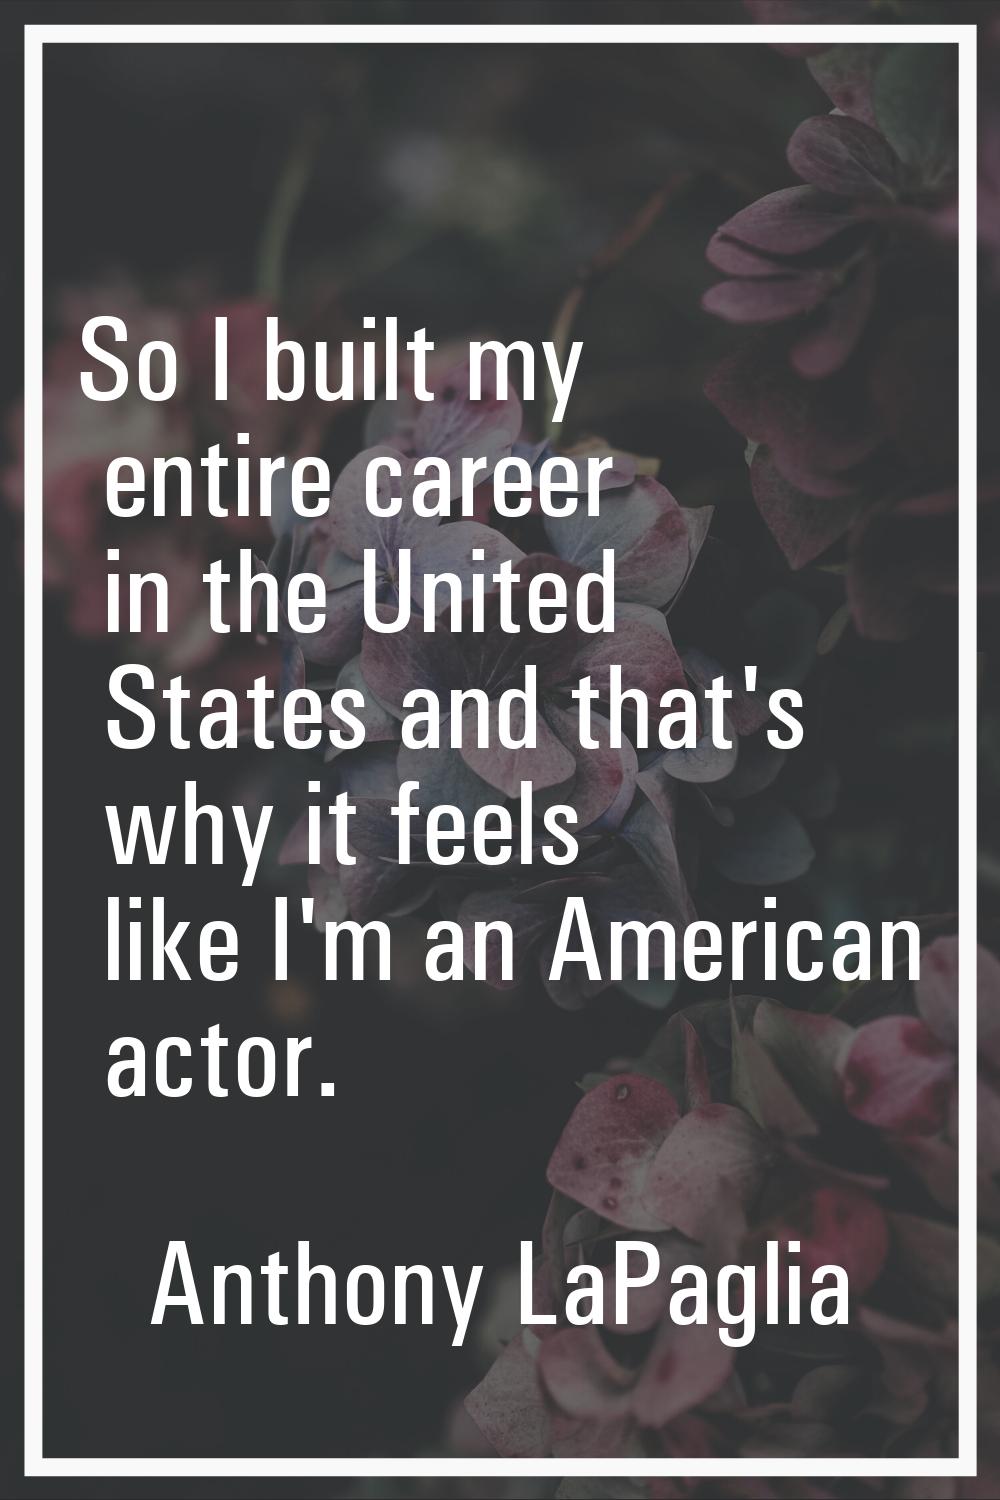 So I built my entire career in the United States and that's why it feels like I'm an American actor